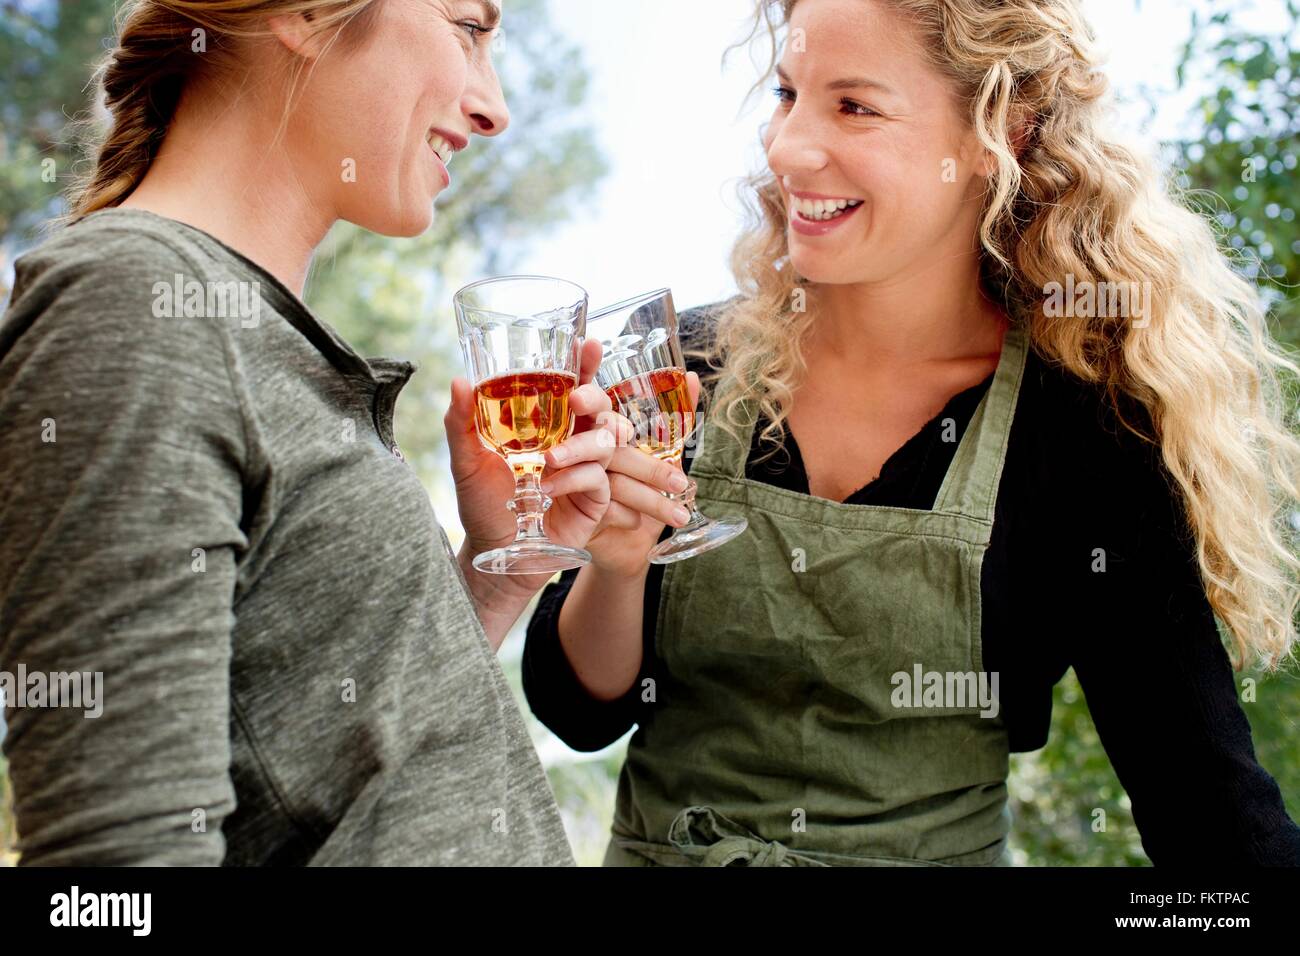 Two women toasting with wine glasses Stock Photo